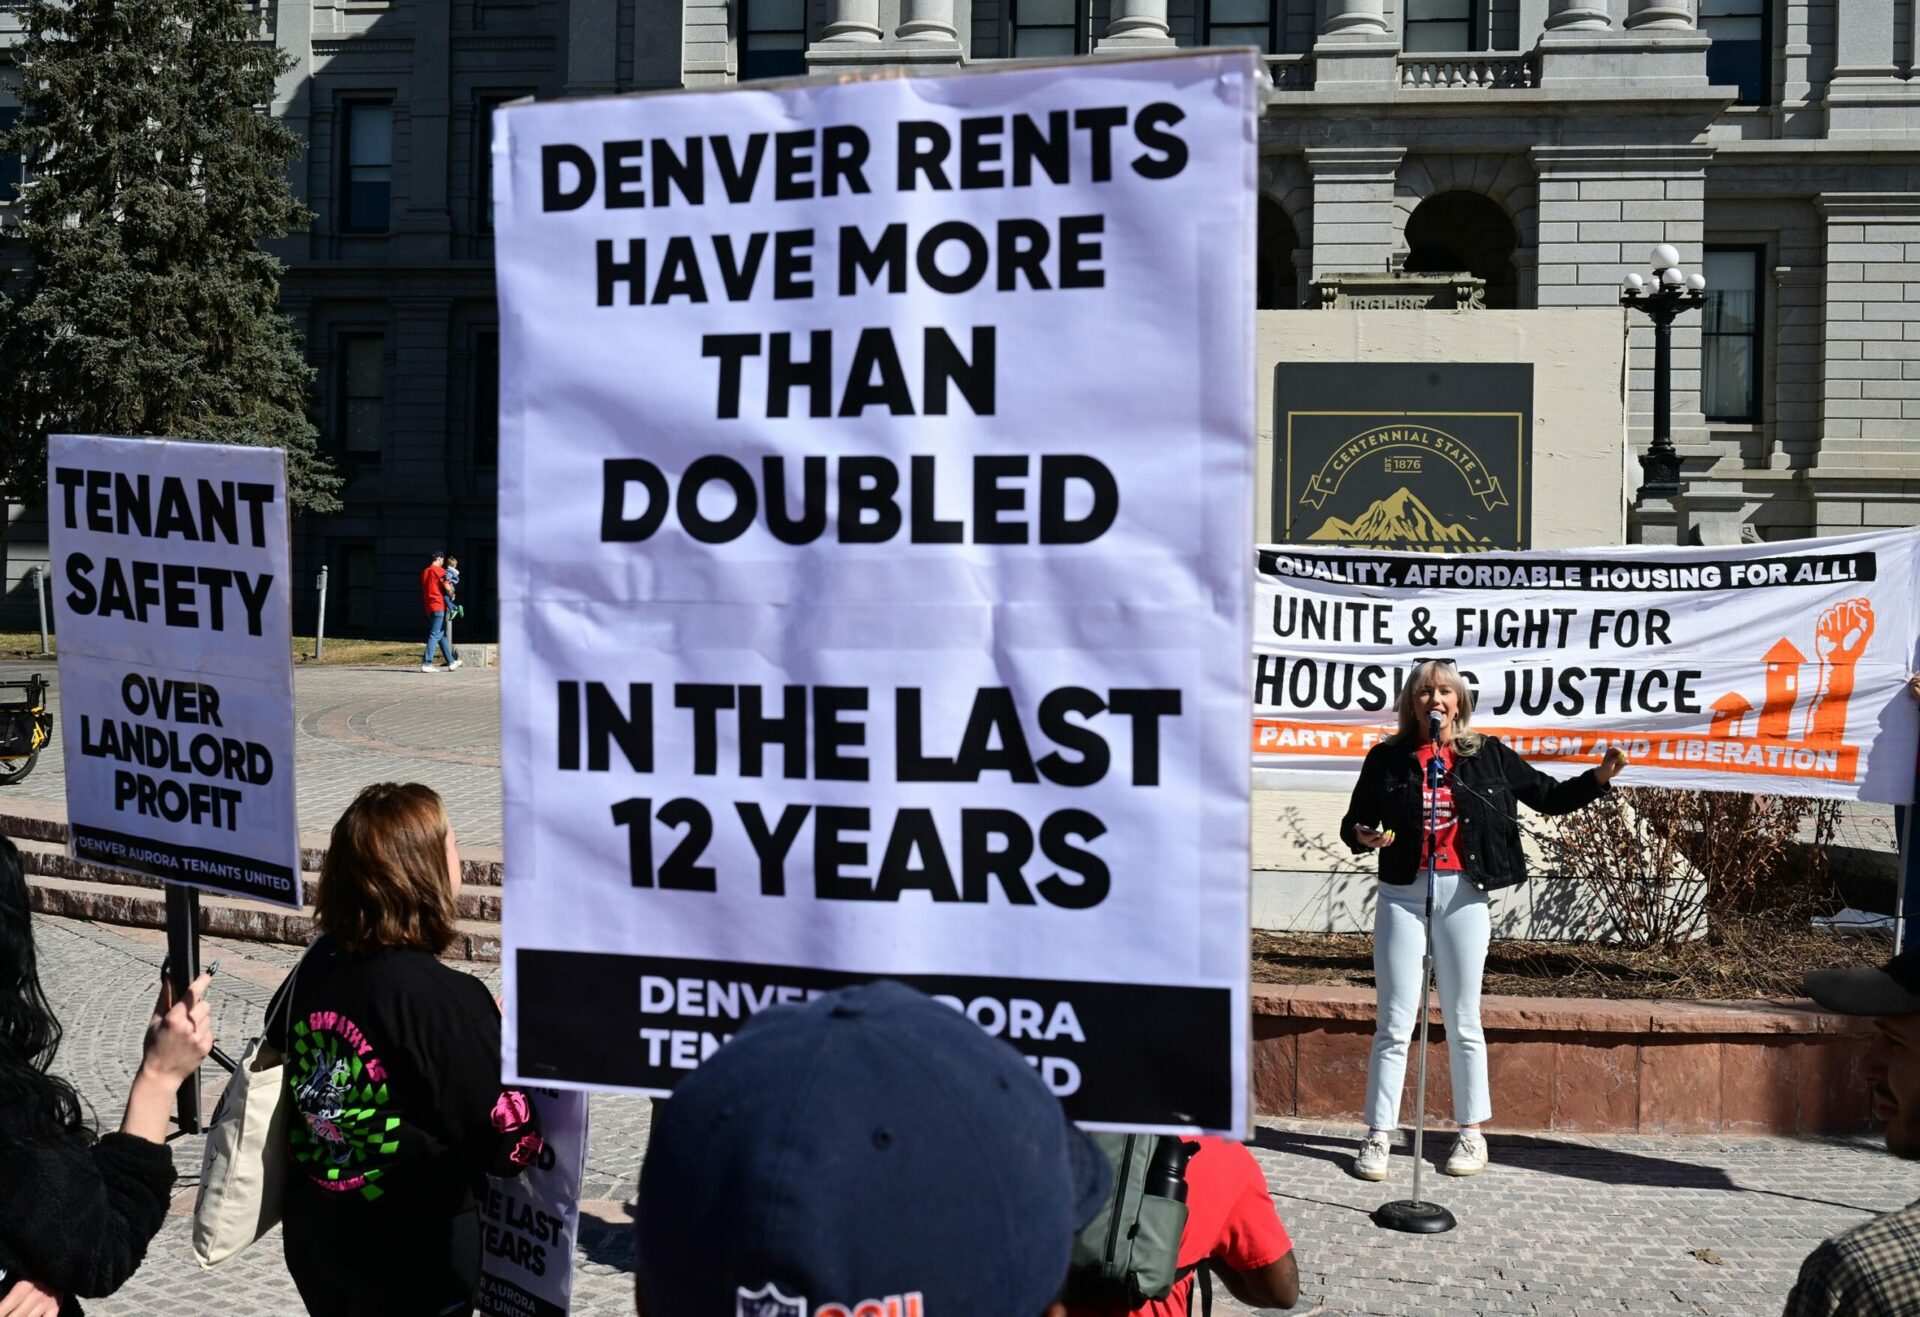 Amid rising evictions and rents, states grapple with protections in tenant-landlord laws